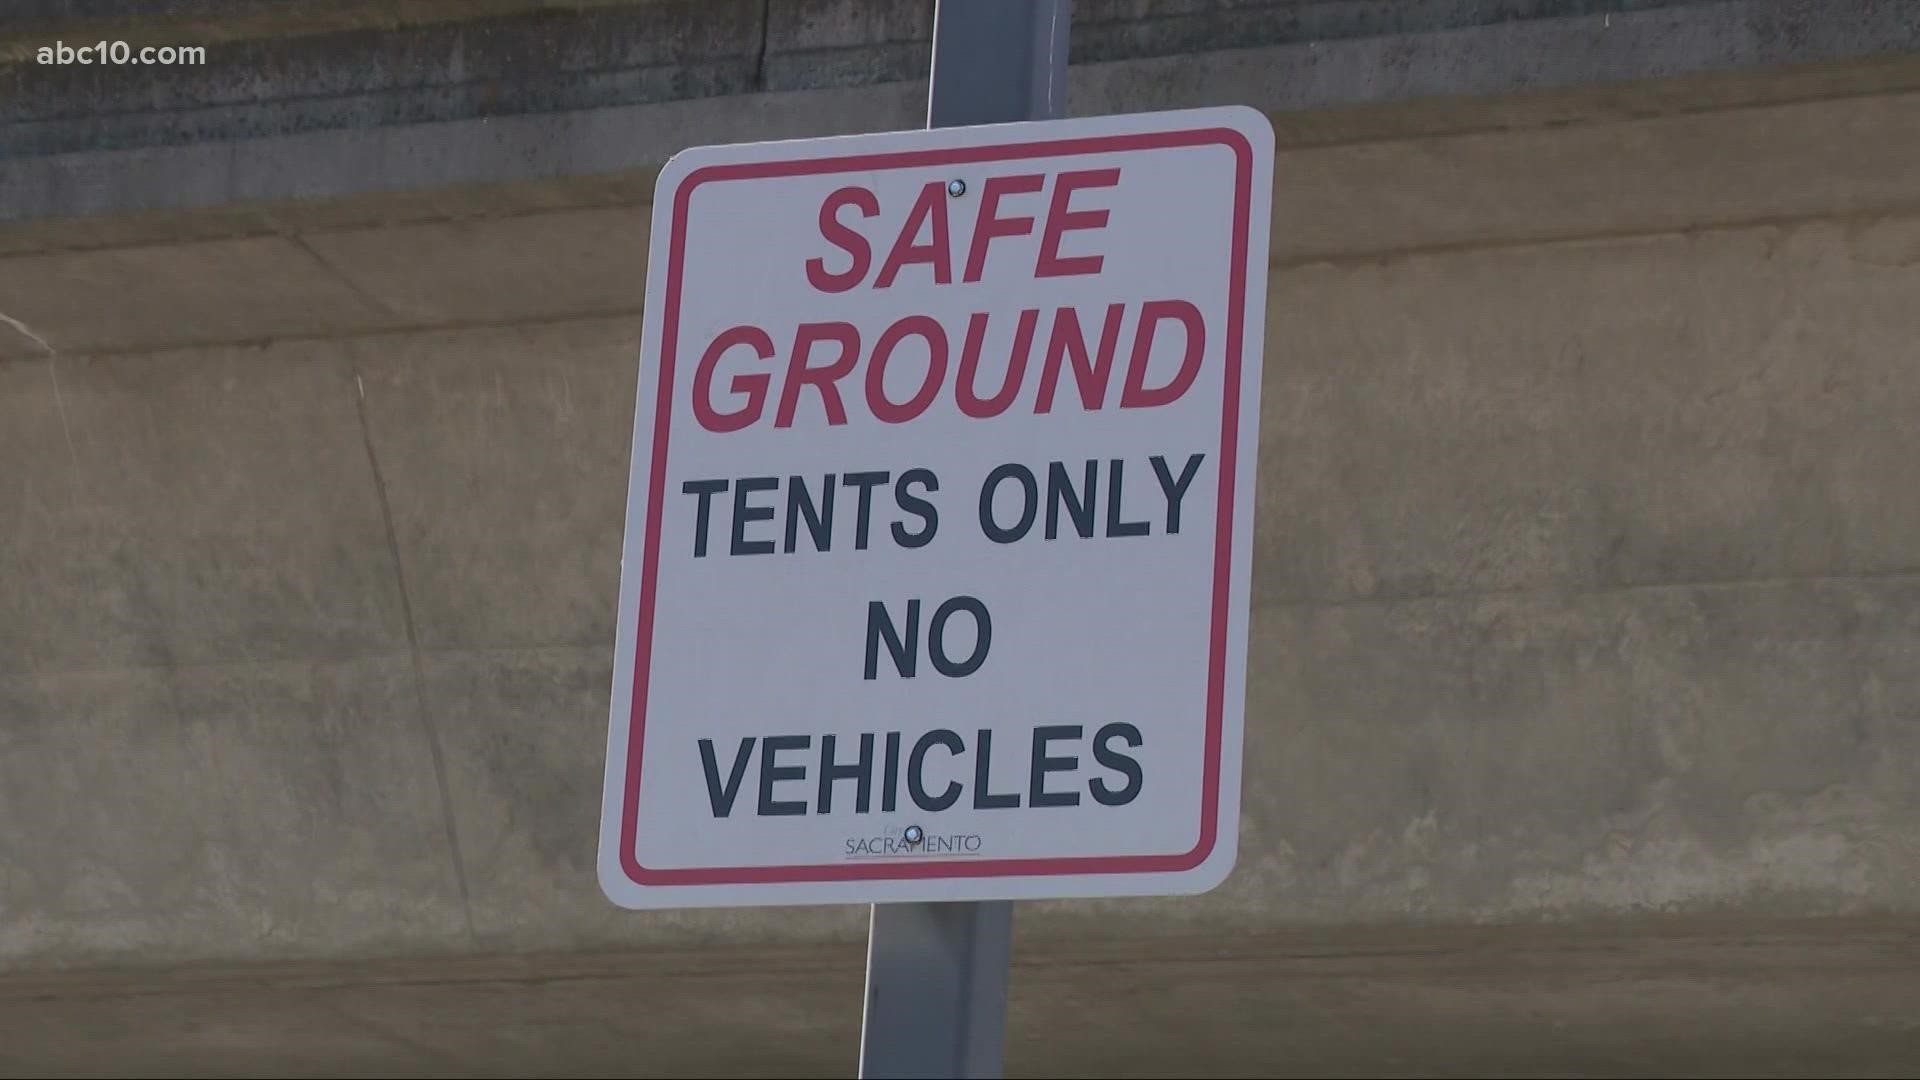 Sacramento is working on developing another so-called Safe Ground camping area, designed specifically for seniors experiencing homelessness.